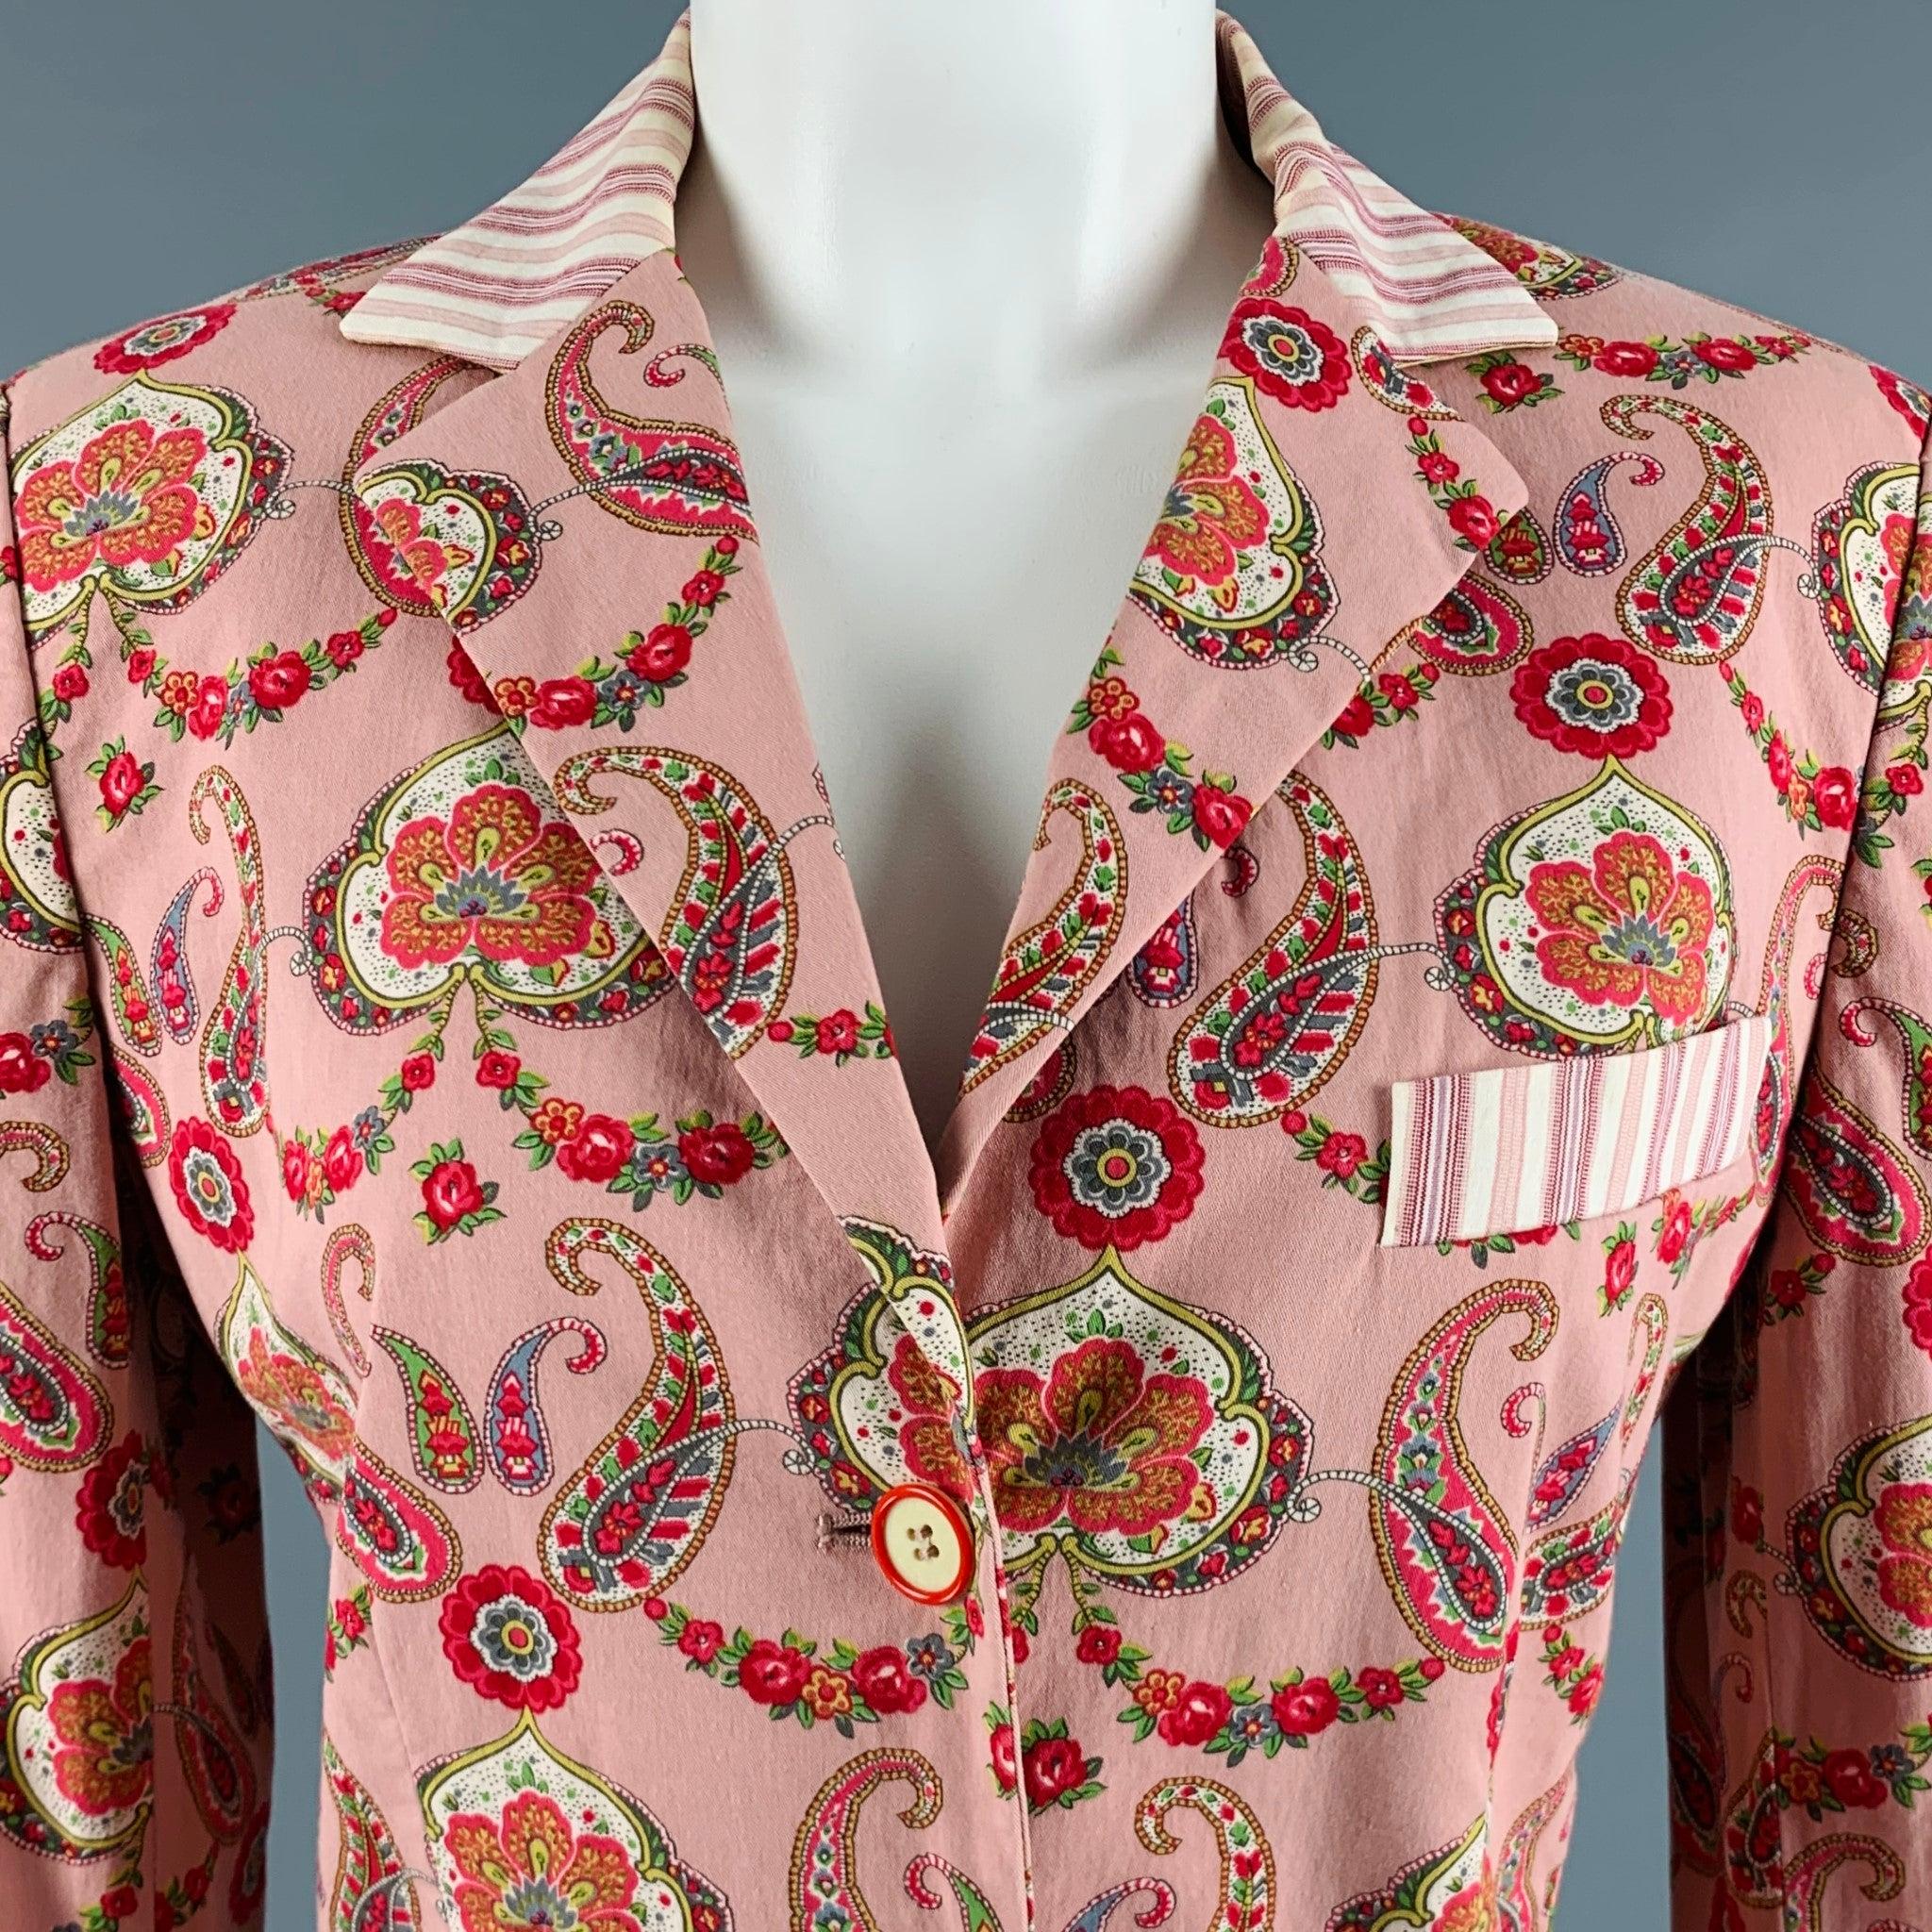 ETRO blazer in a pink and red cotton blend fabric featuring all over paisley pattern, contrast striped notch lapel and pockets, and three button closure. Made in Italy.Excellent Pre-Owned Condition. 

Marked:   42 

Measurements: 
 
Shoulder: 16.5